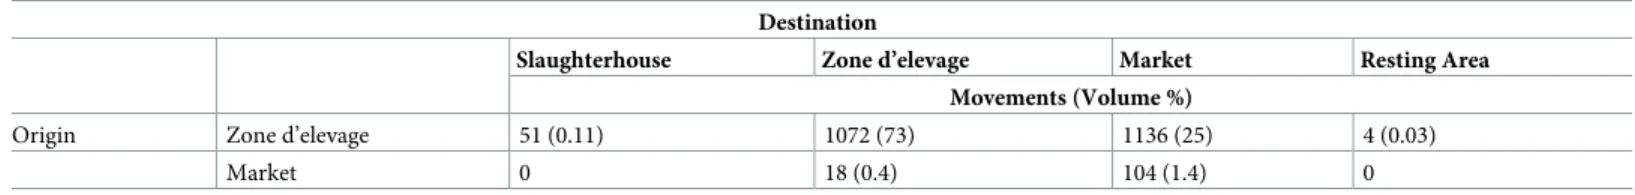 Table 1 shows the distribution of movements according to the origin and destination activi- activi-ties and the corresponding volumes (given as a percentage of the total number of exchanged animals)